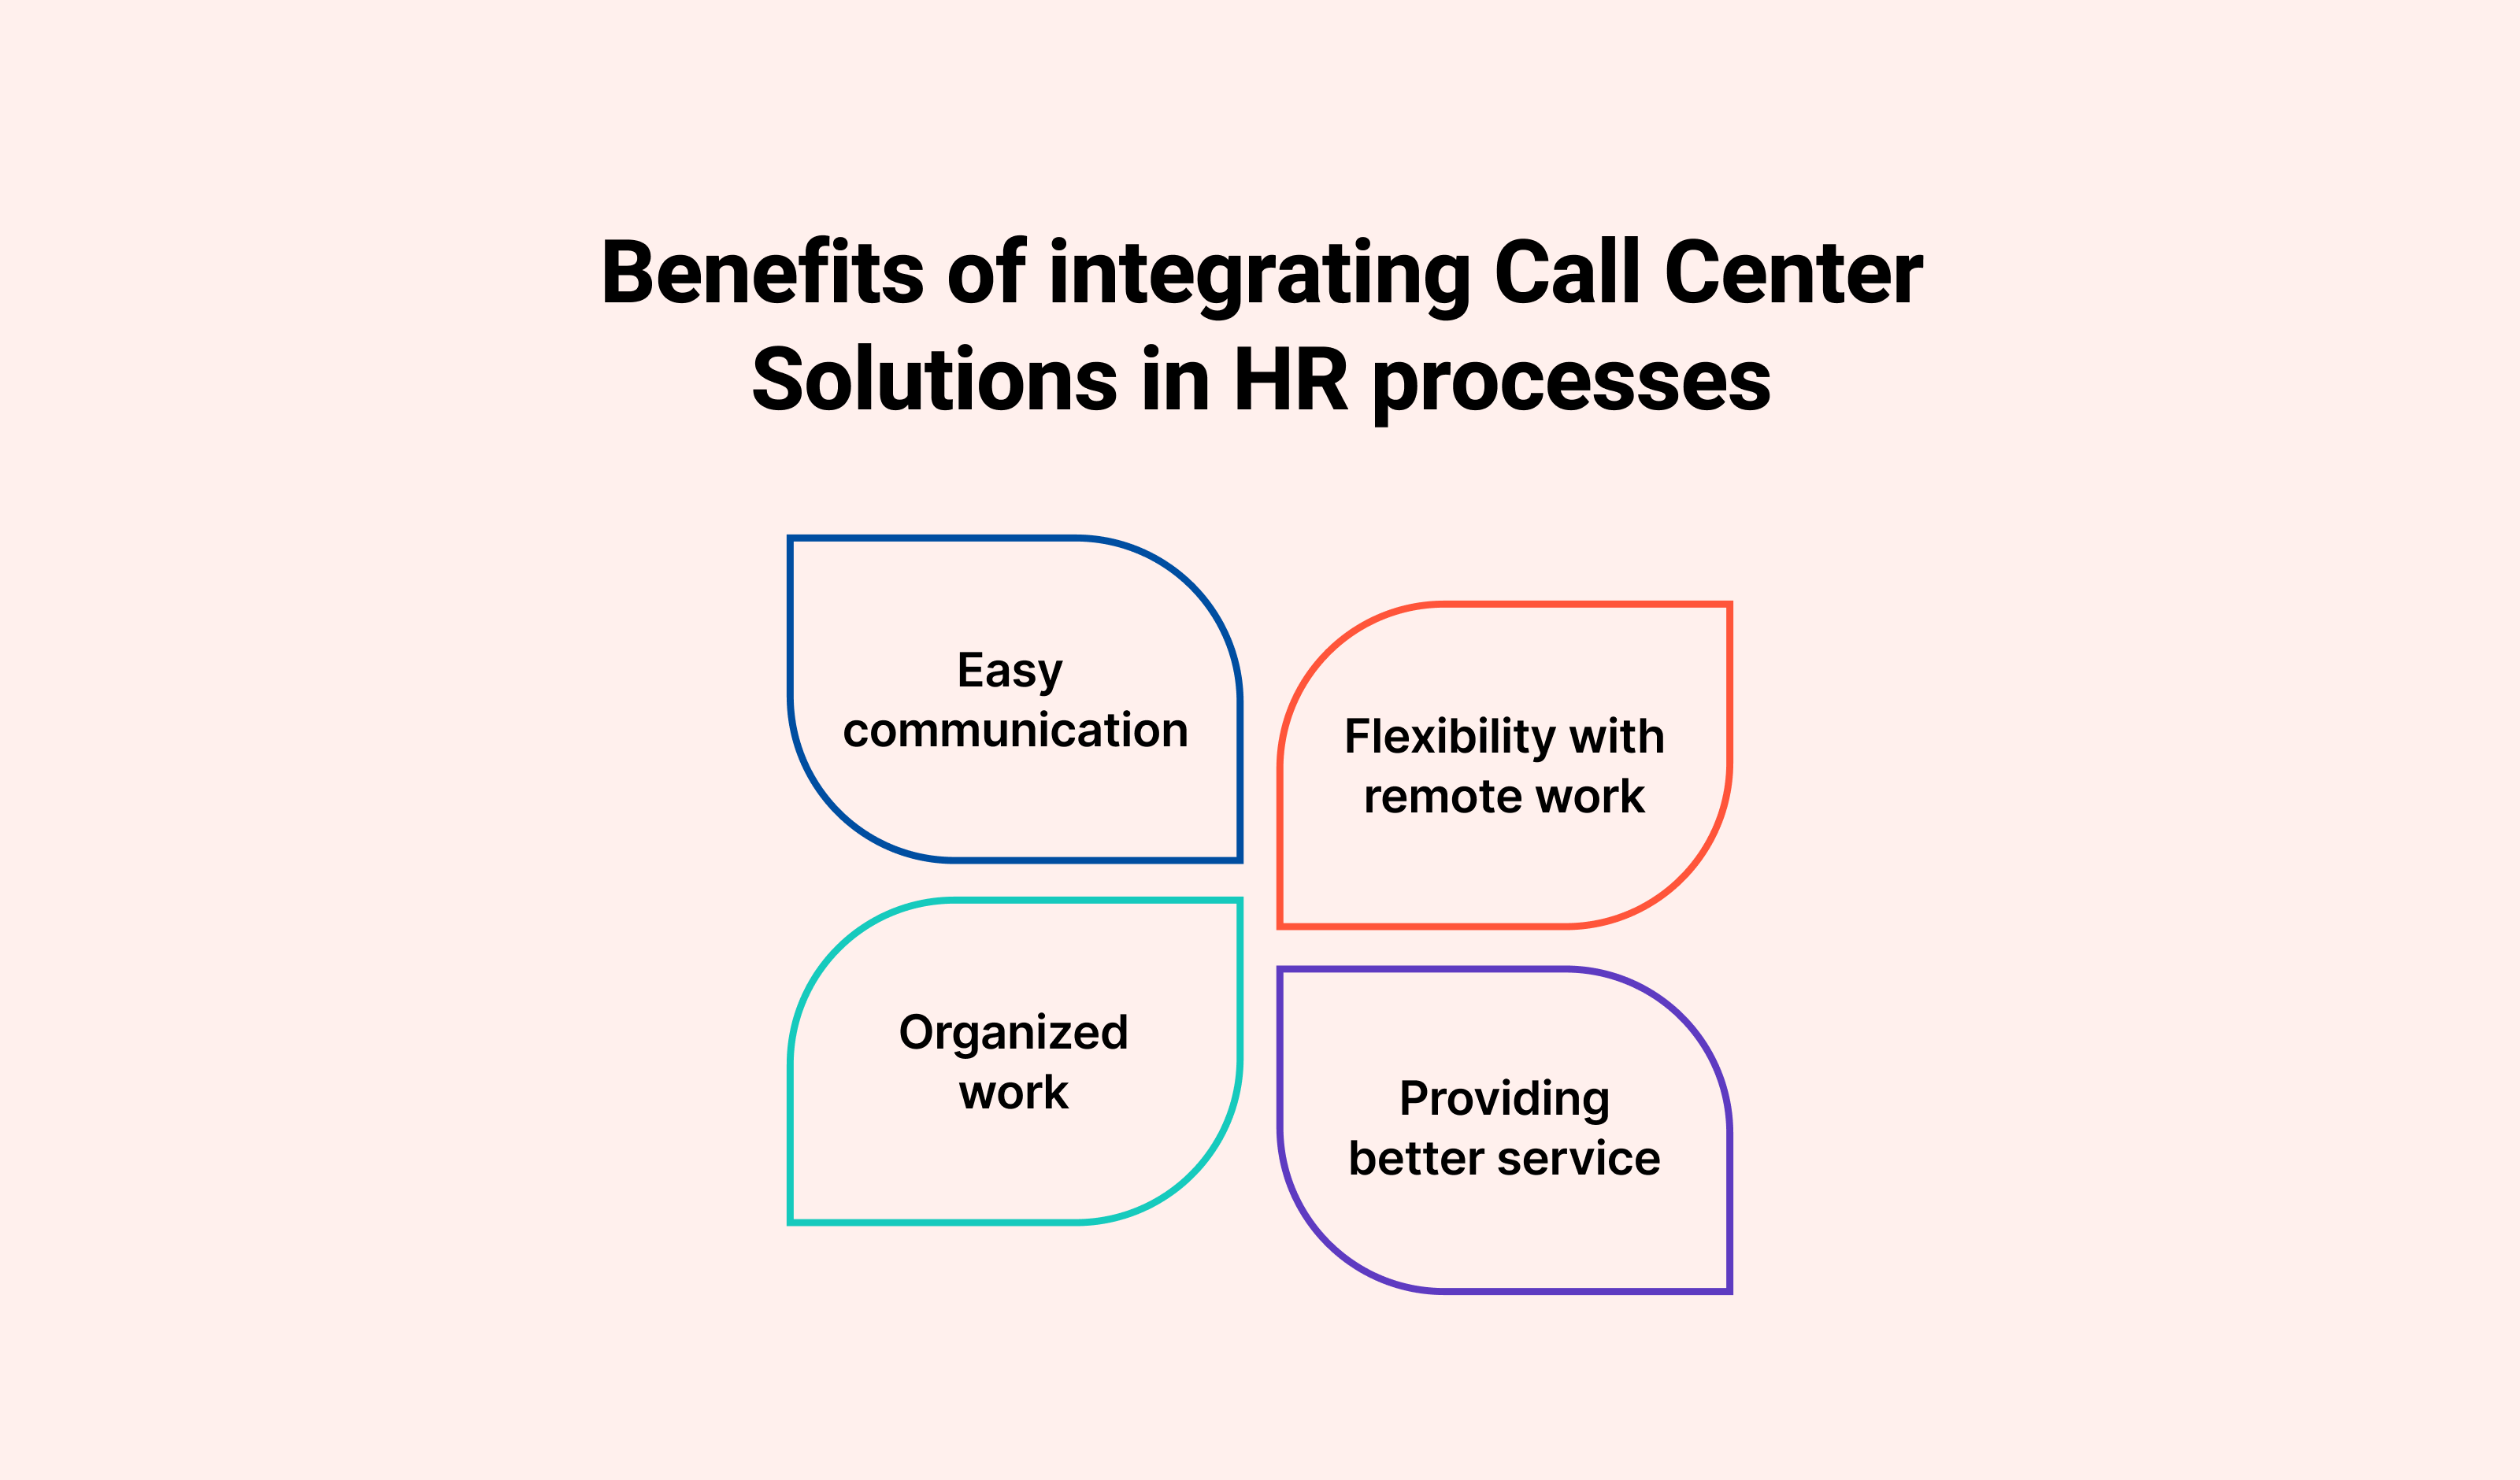 Benefits of Integrating Call Center Solutions in HR Processes: